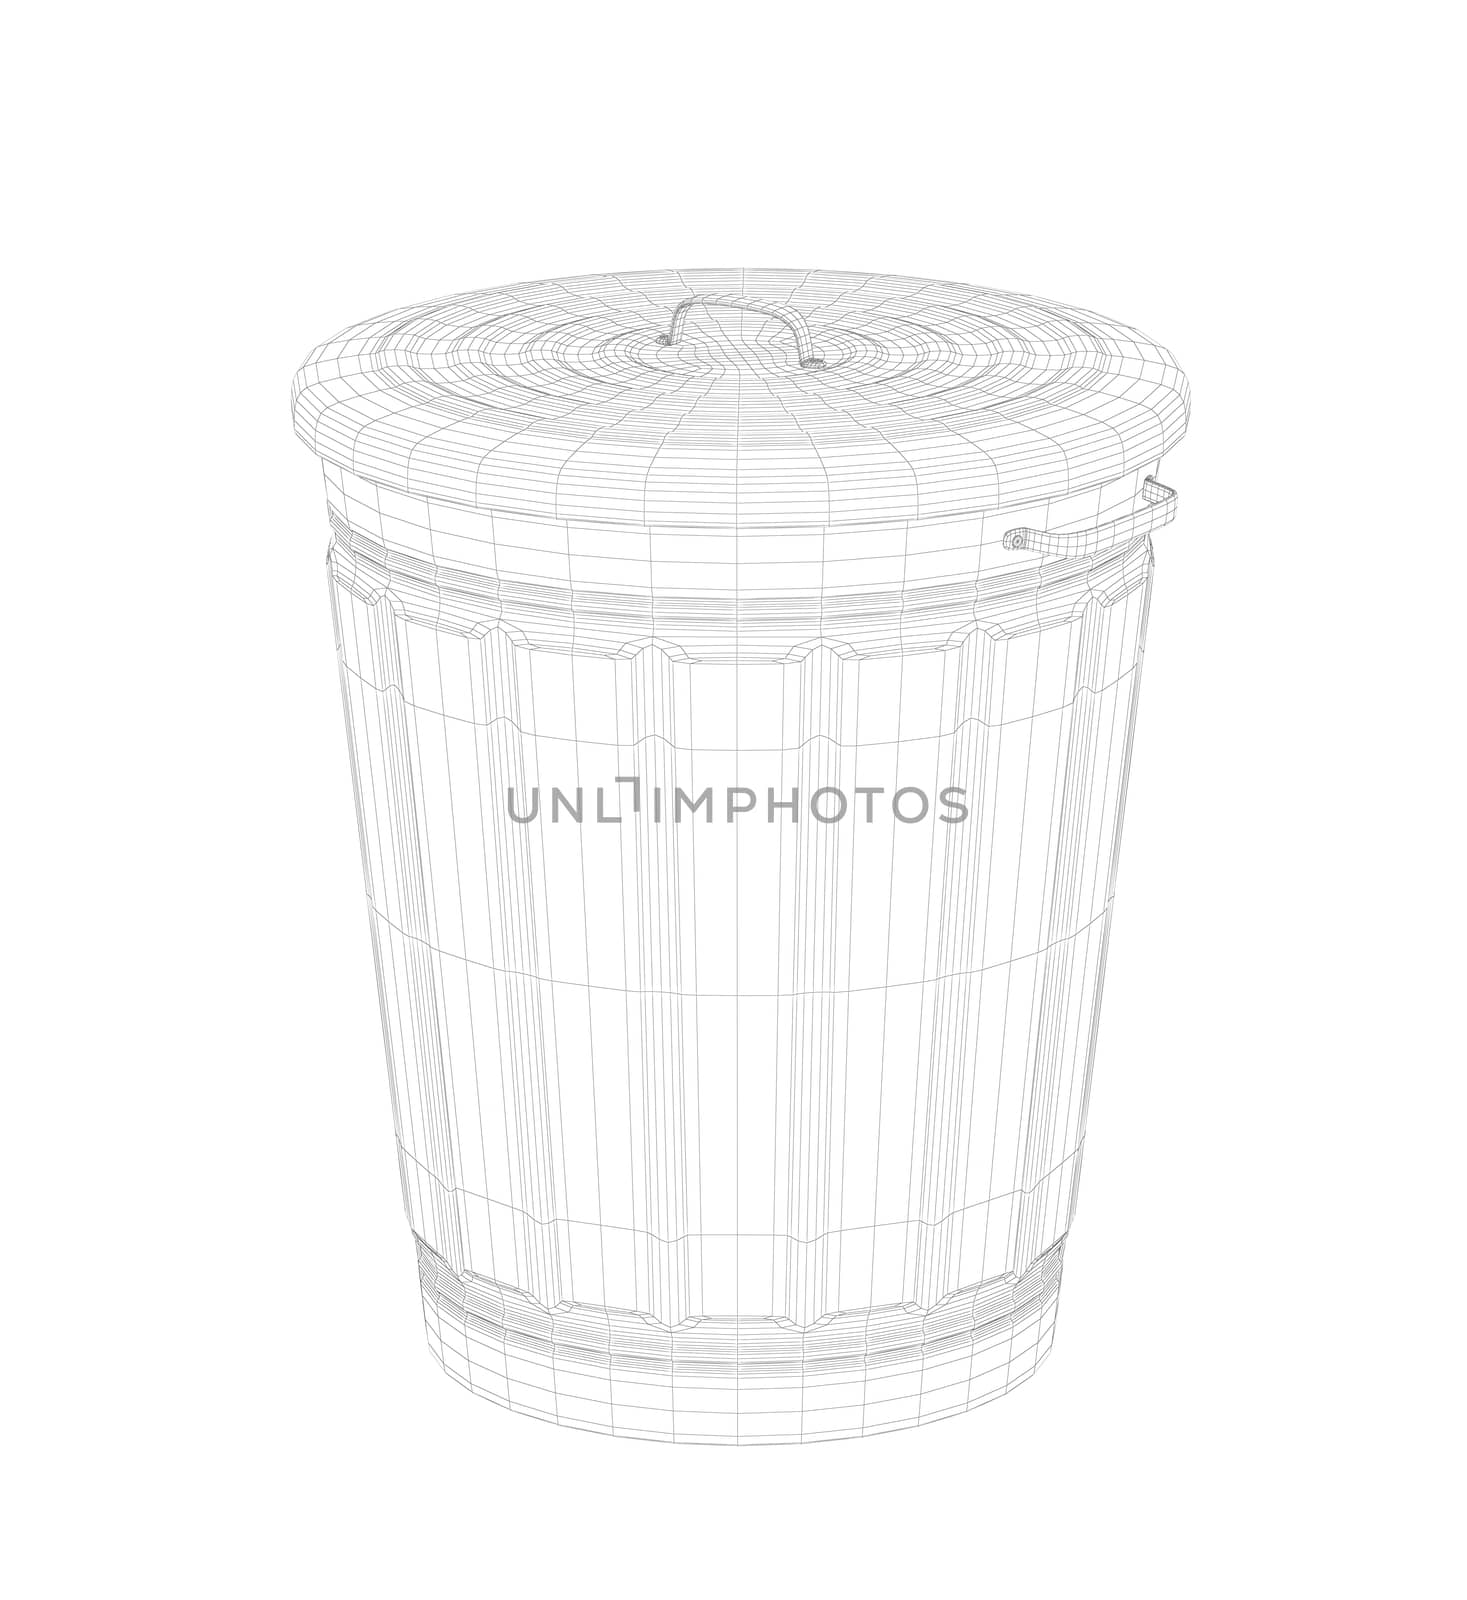 3D wire-frame model of trash can by magraphics